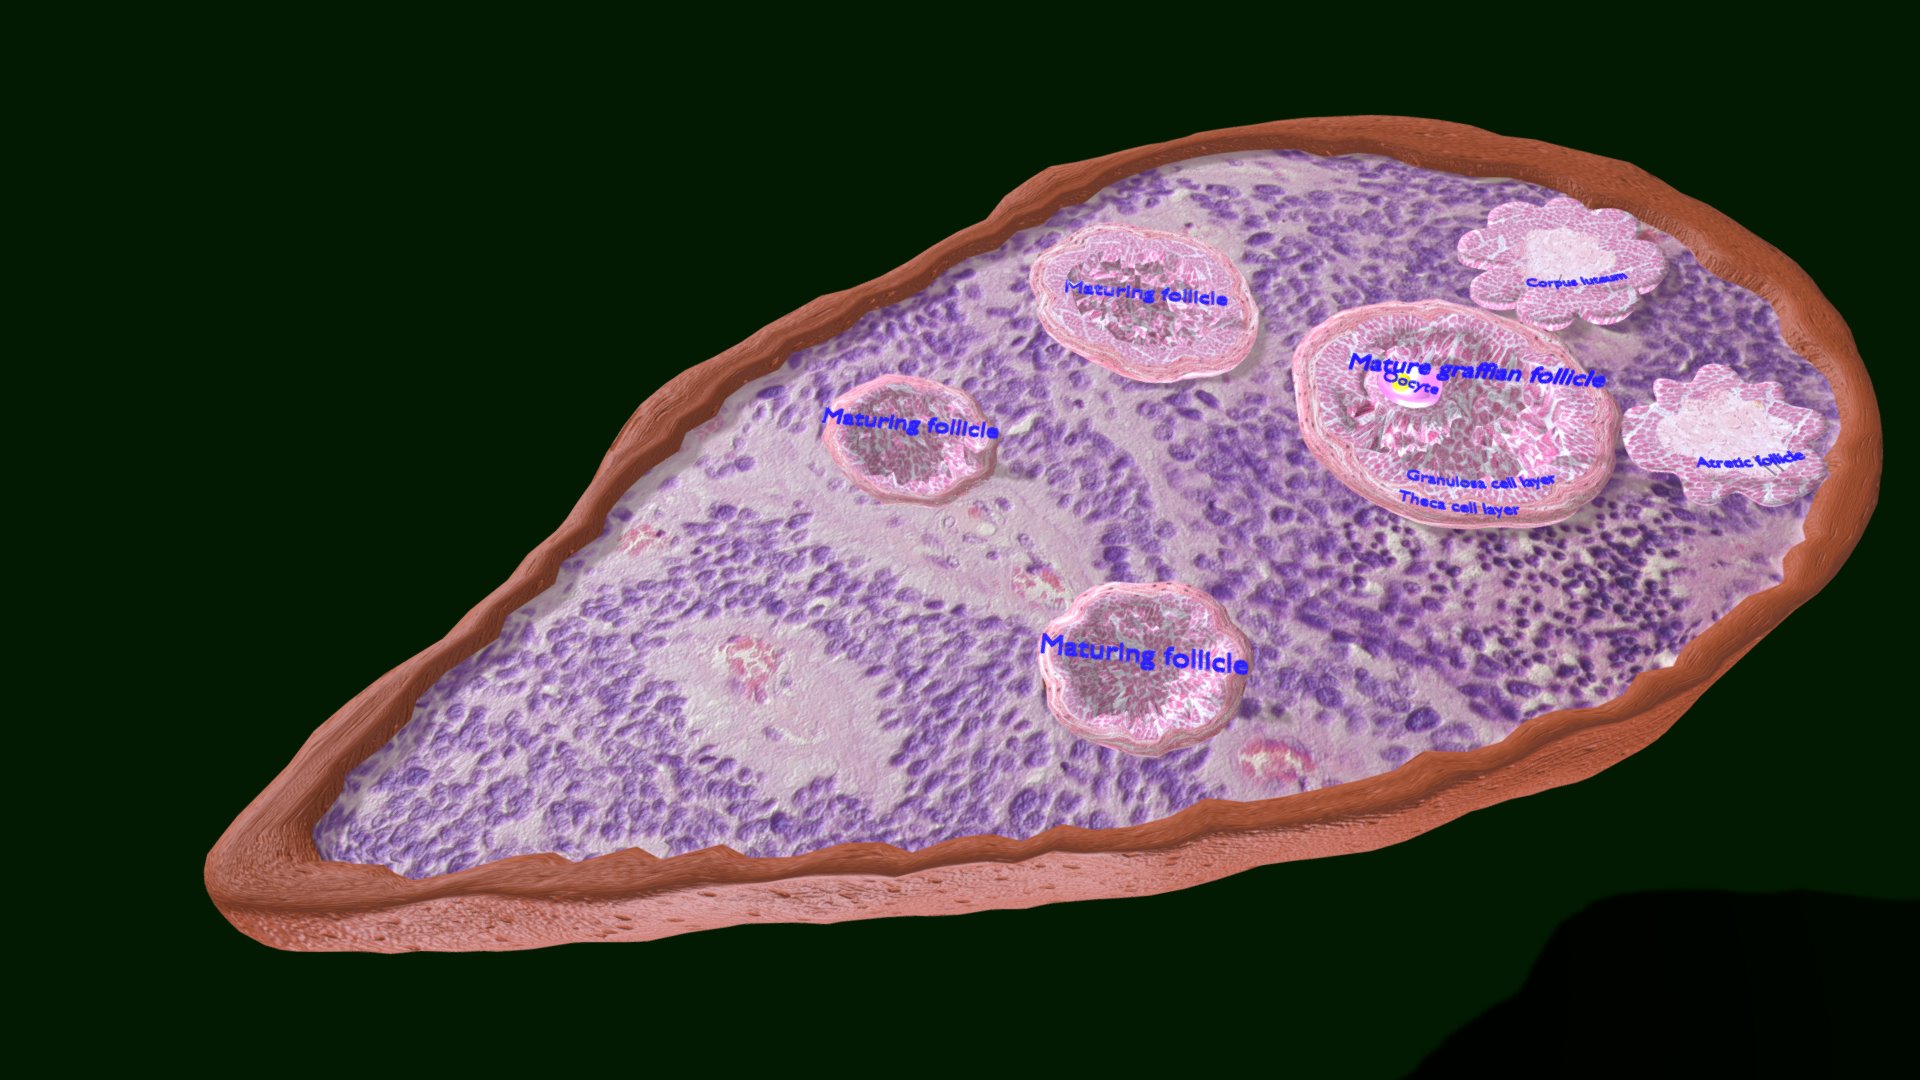 3D model Ovary Cross Section - This is a 3D model of the Ovary Cross Section. The 3D model is about a close-up of a petri dish.